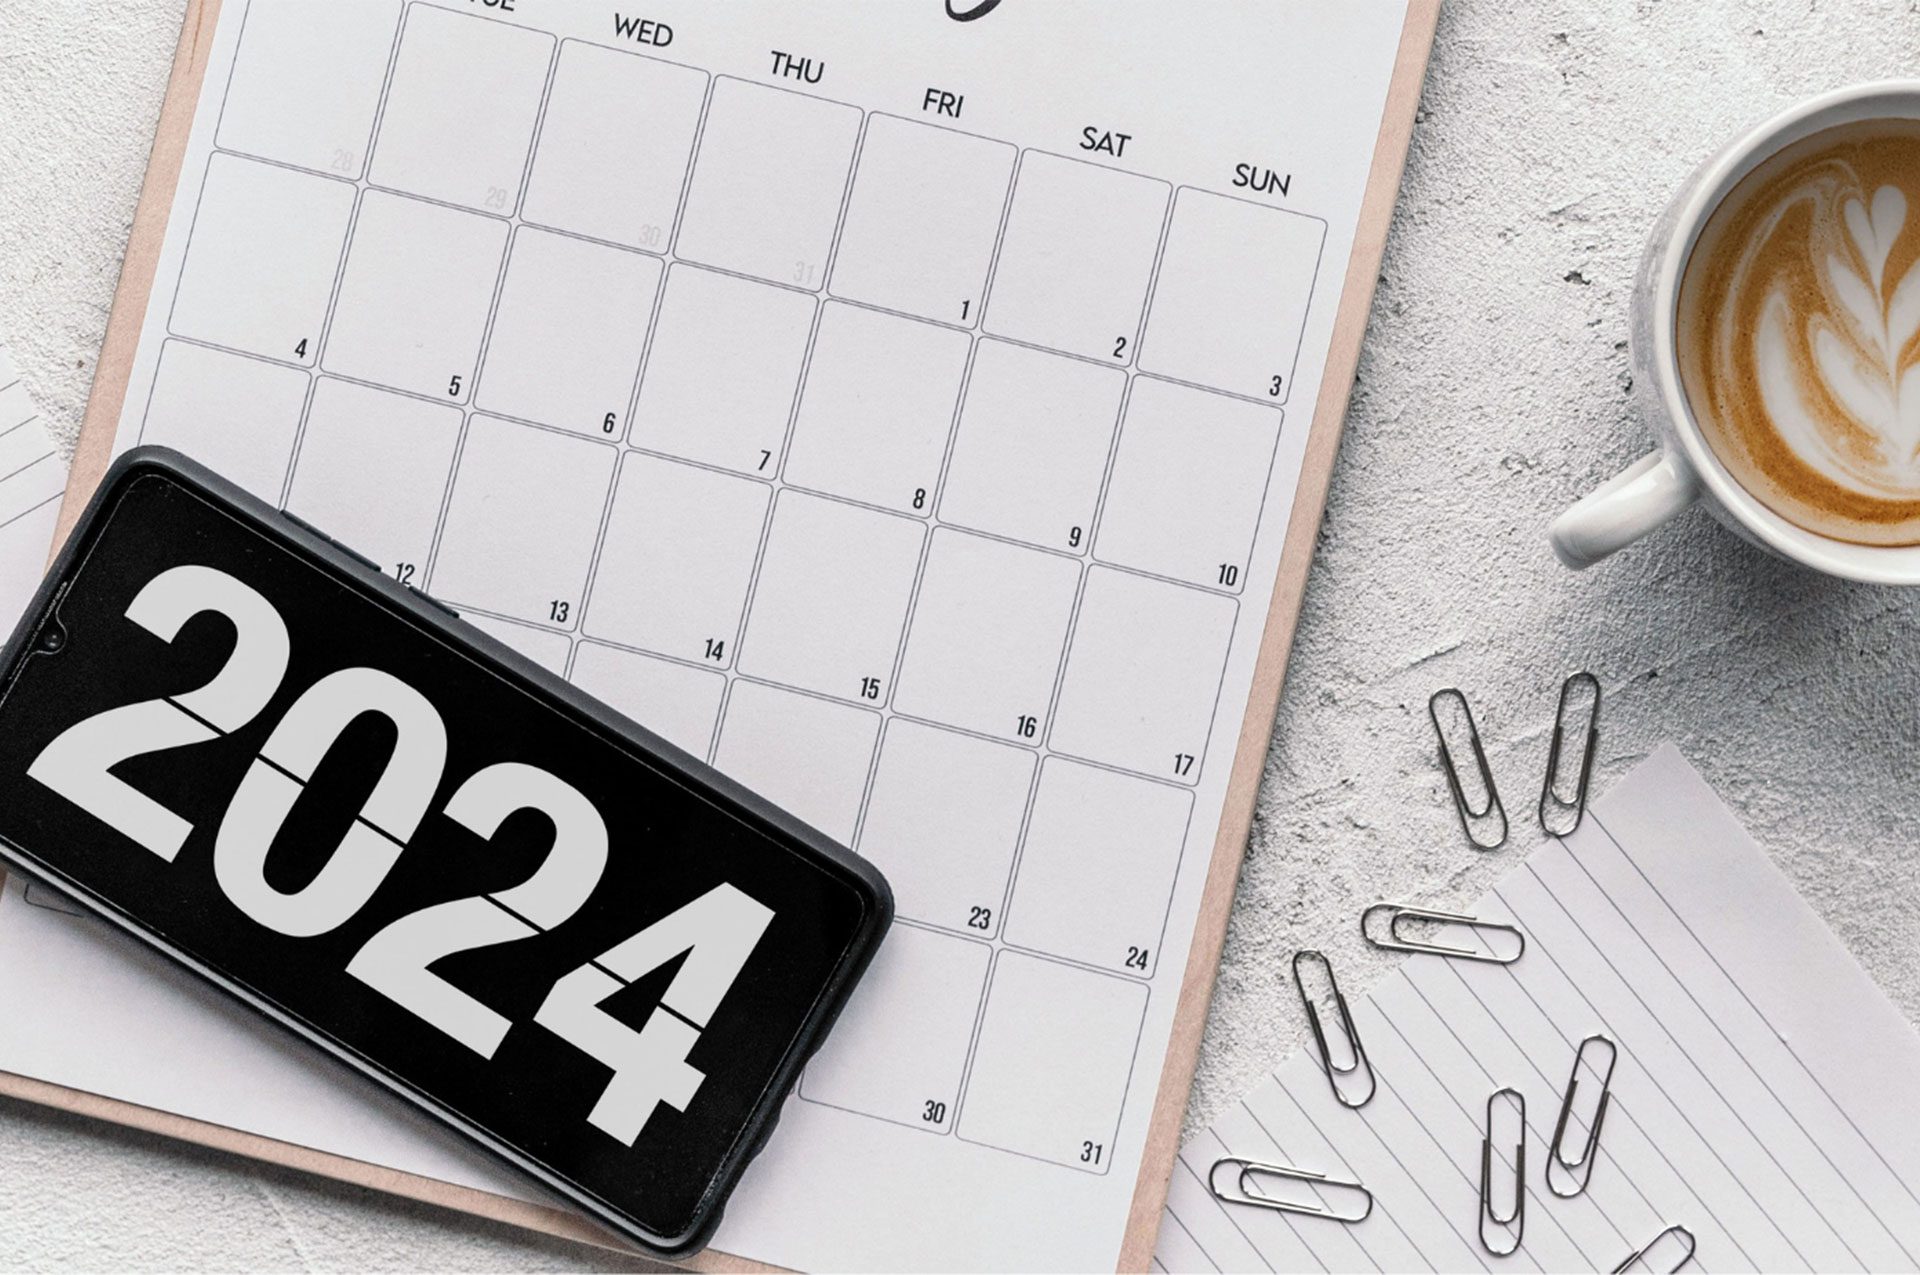 Calendar, 2024 image on cell phone screen, cup of coffee and paper clips resting on desk surface